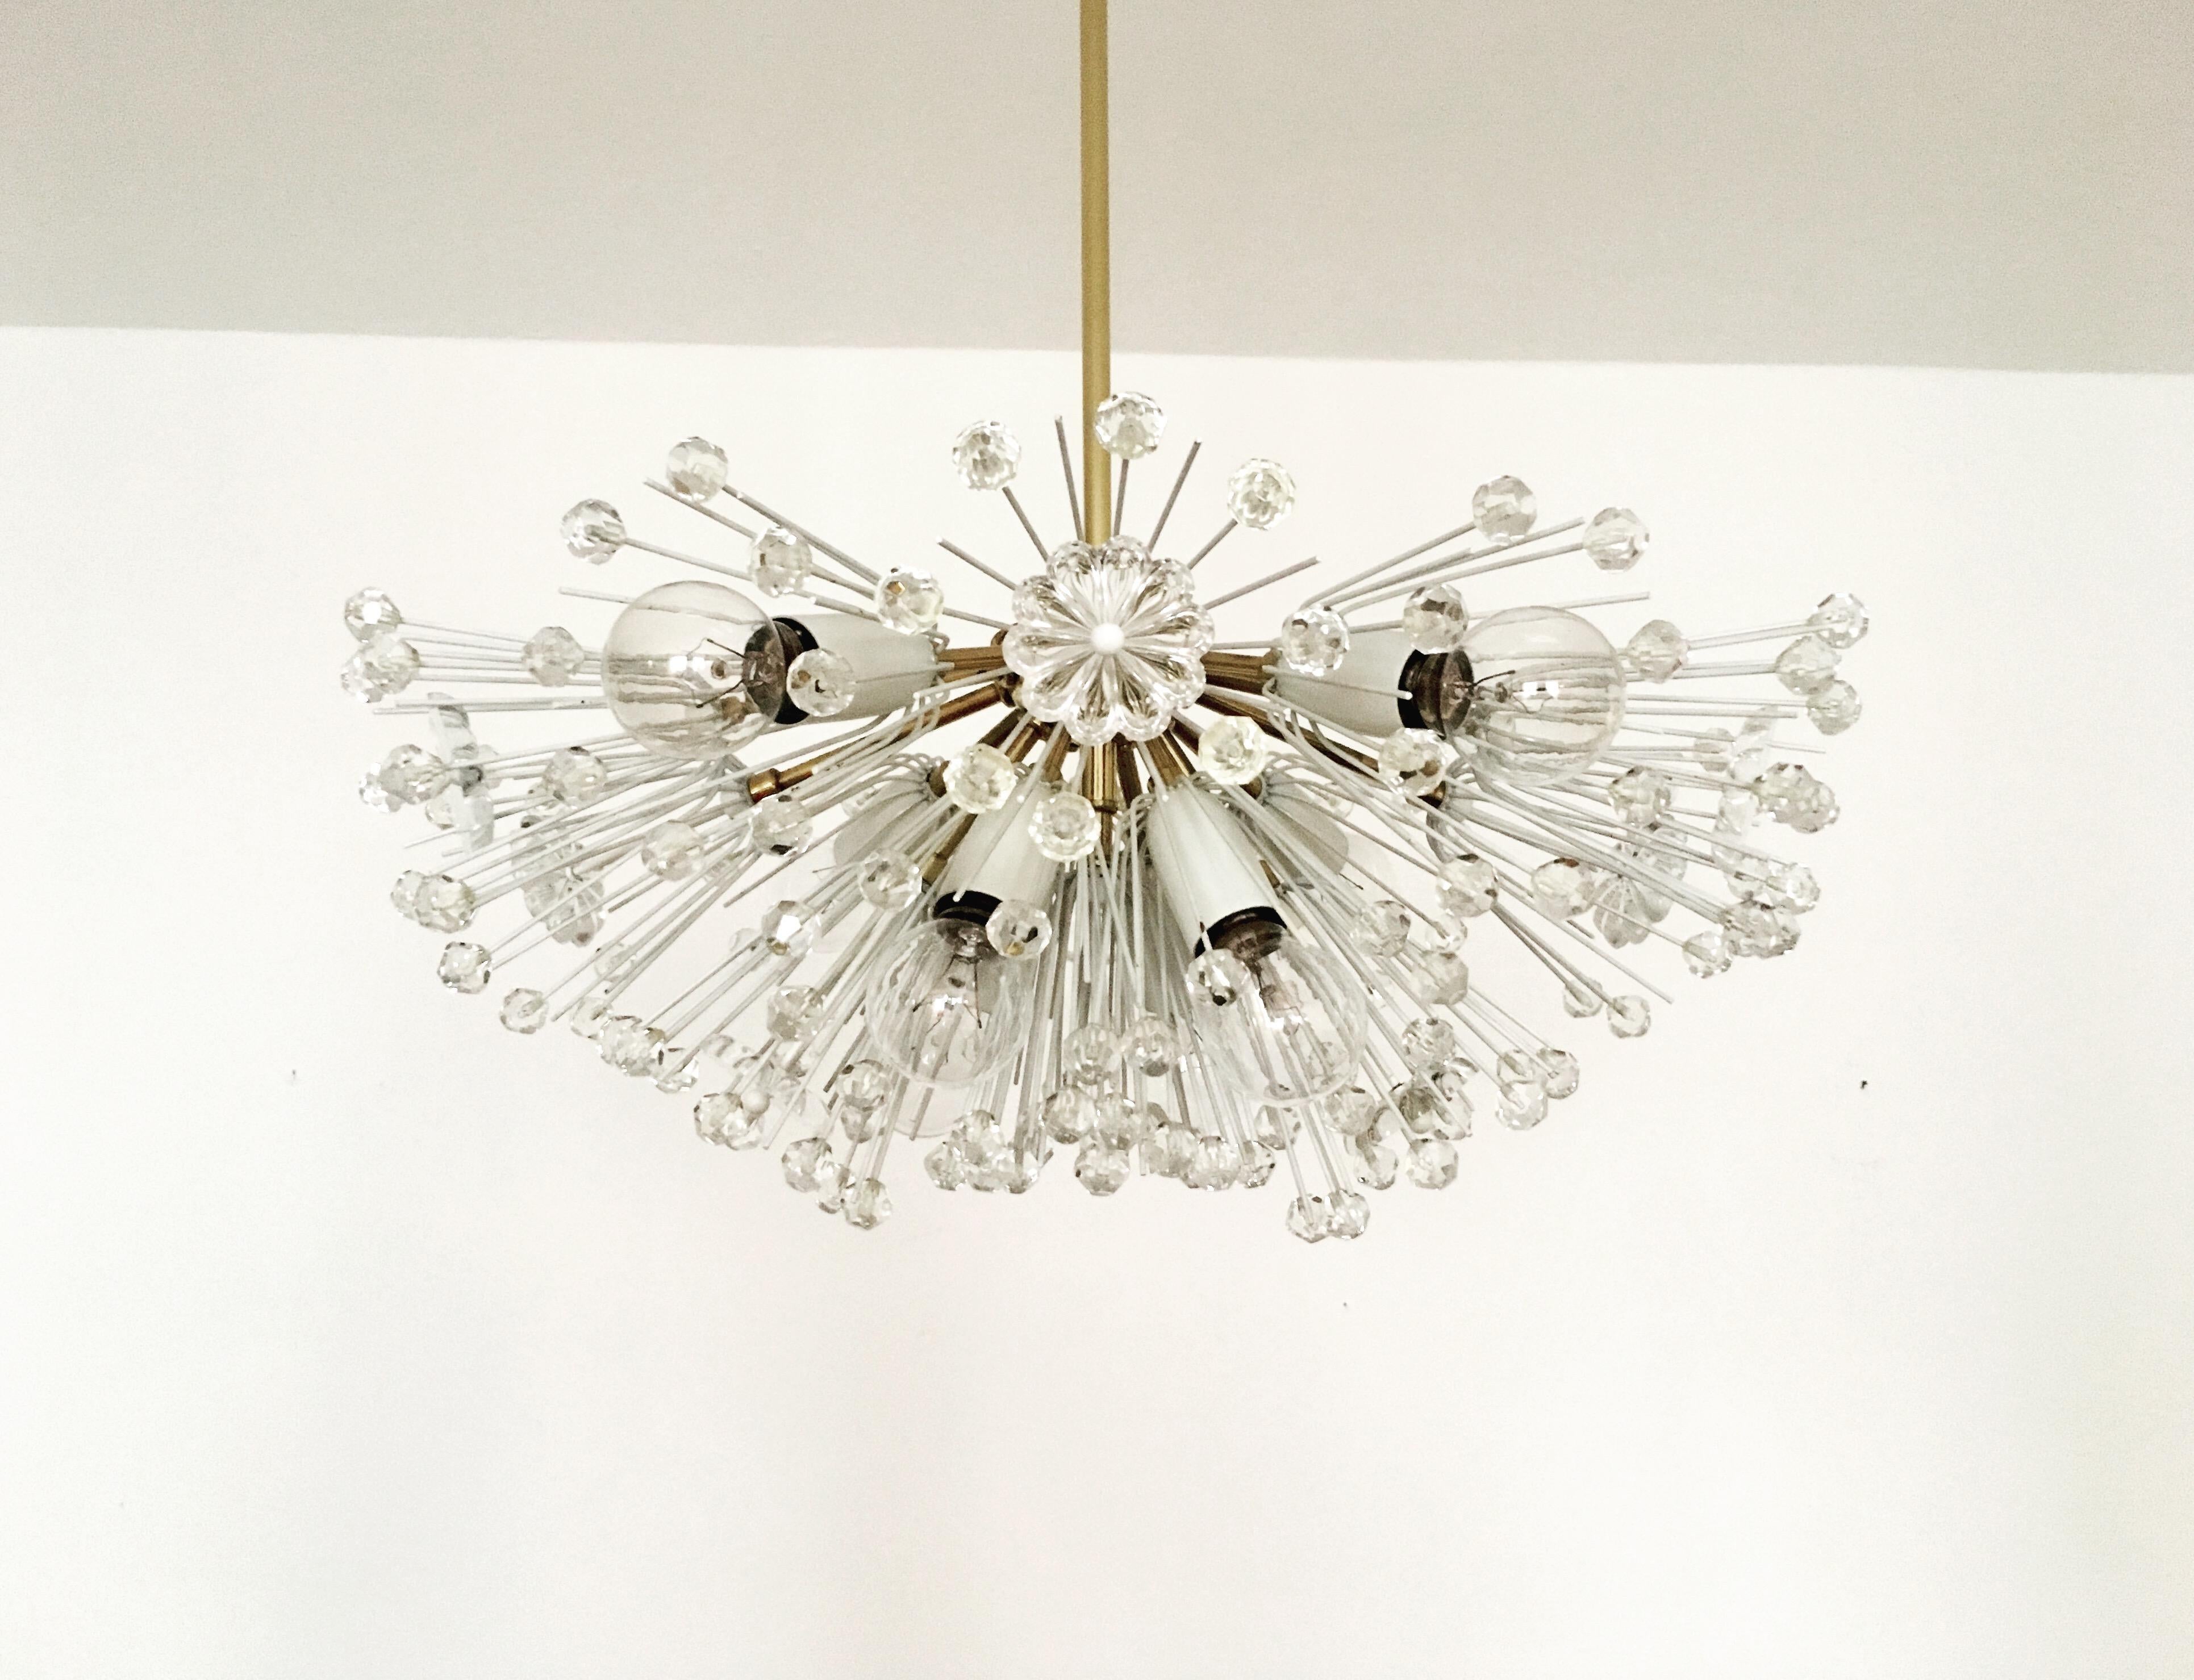 Wonderful chandelier from the 1950s.
The lamp with its lavishly decorated flowers and brass details has a very luxurious look and sparkles particularly beautifully.
The design and the materials used create a great glittering light.
A stunning